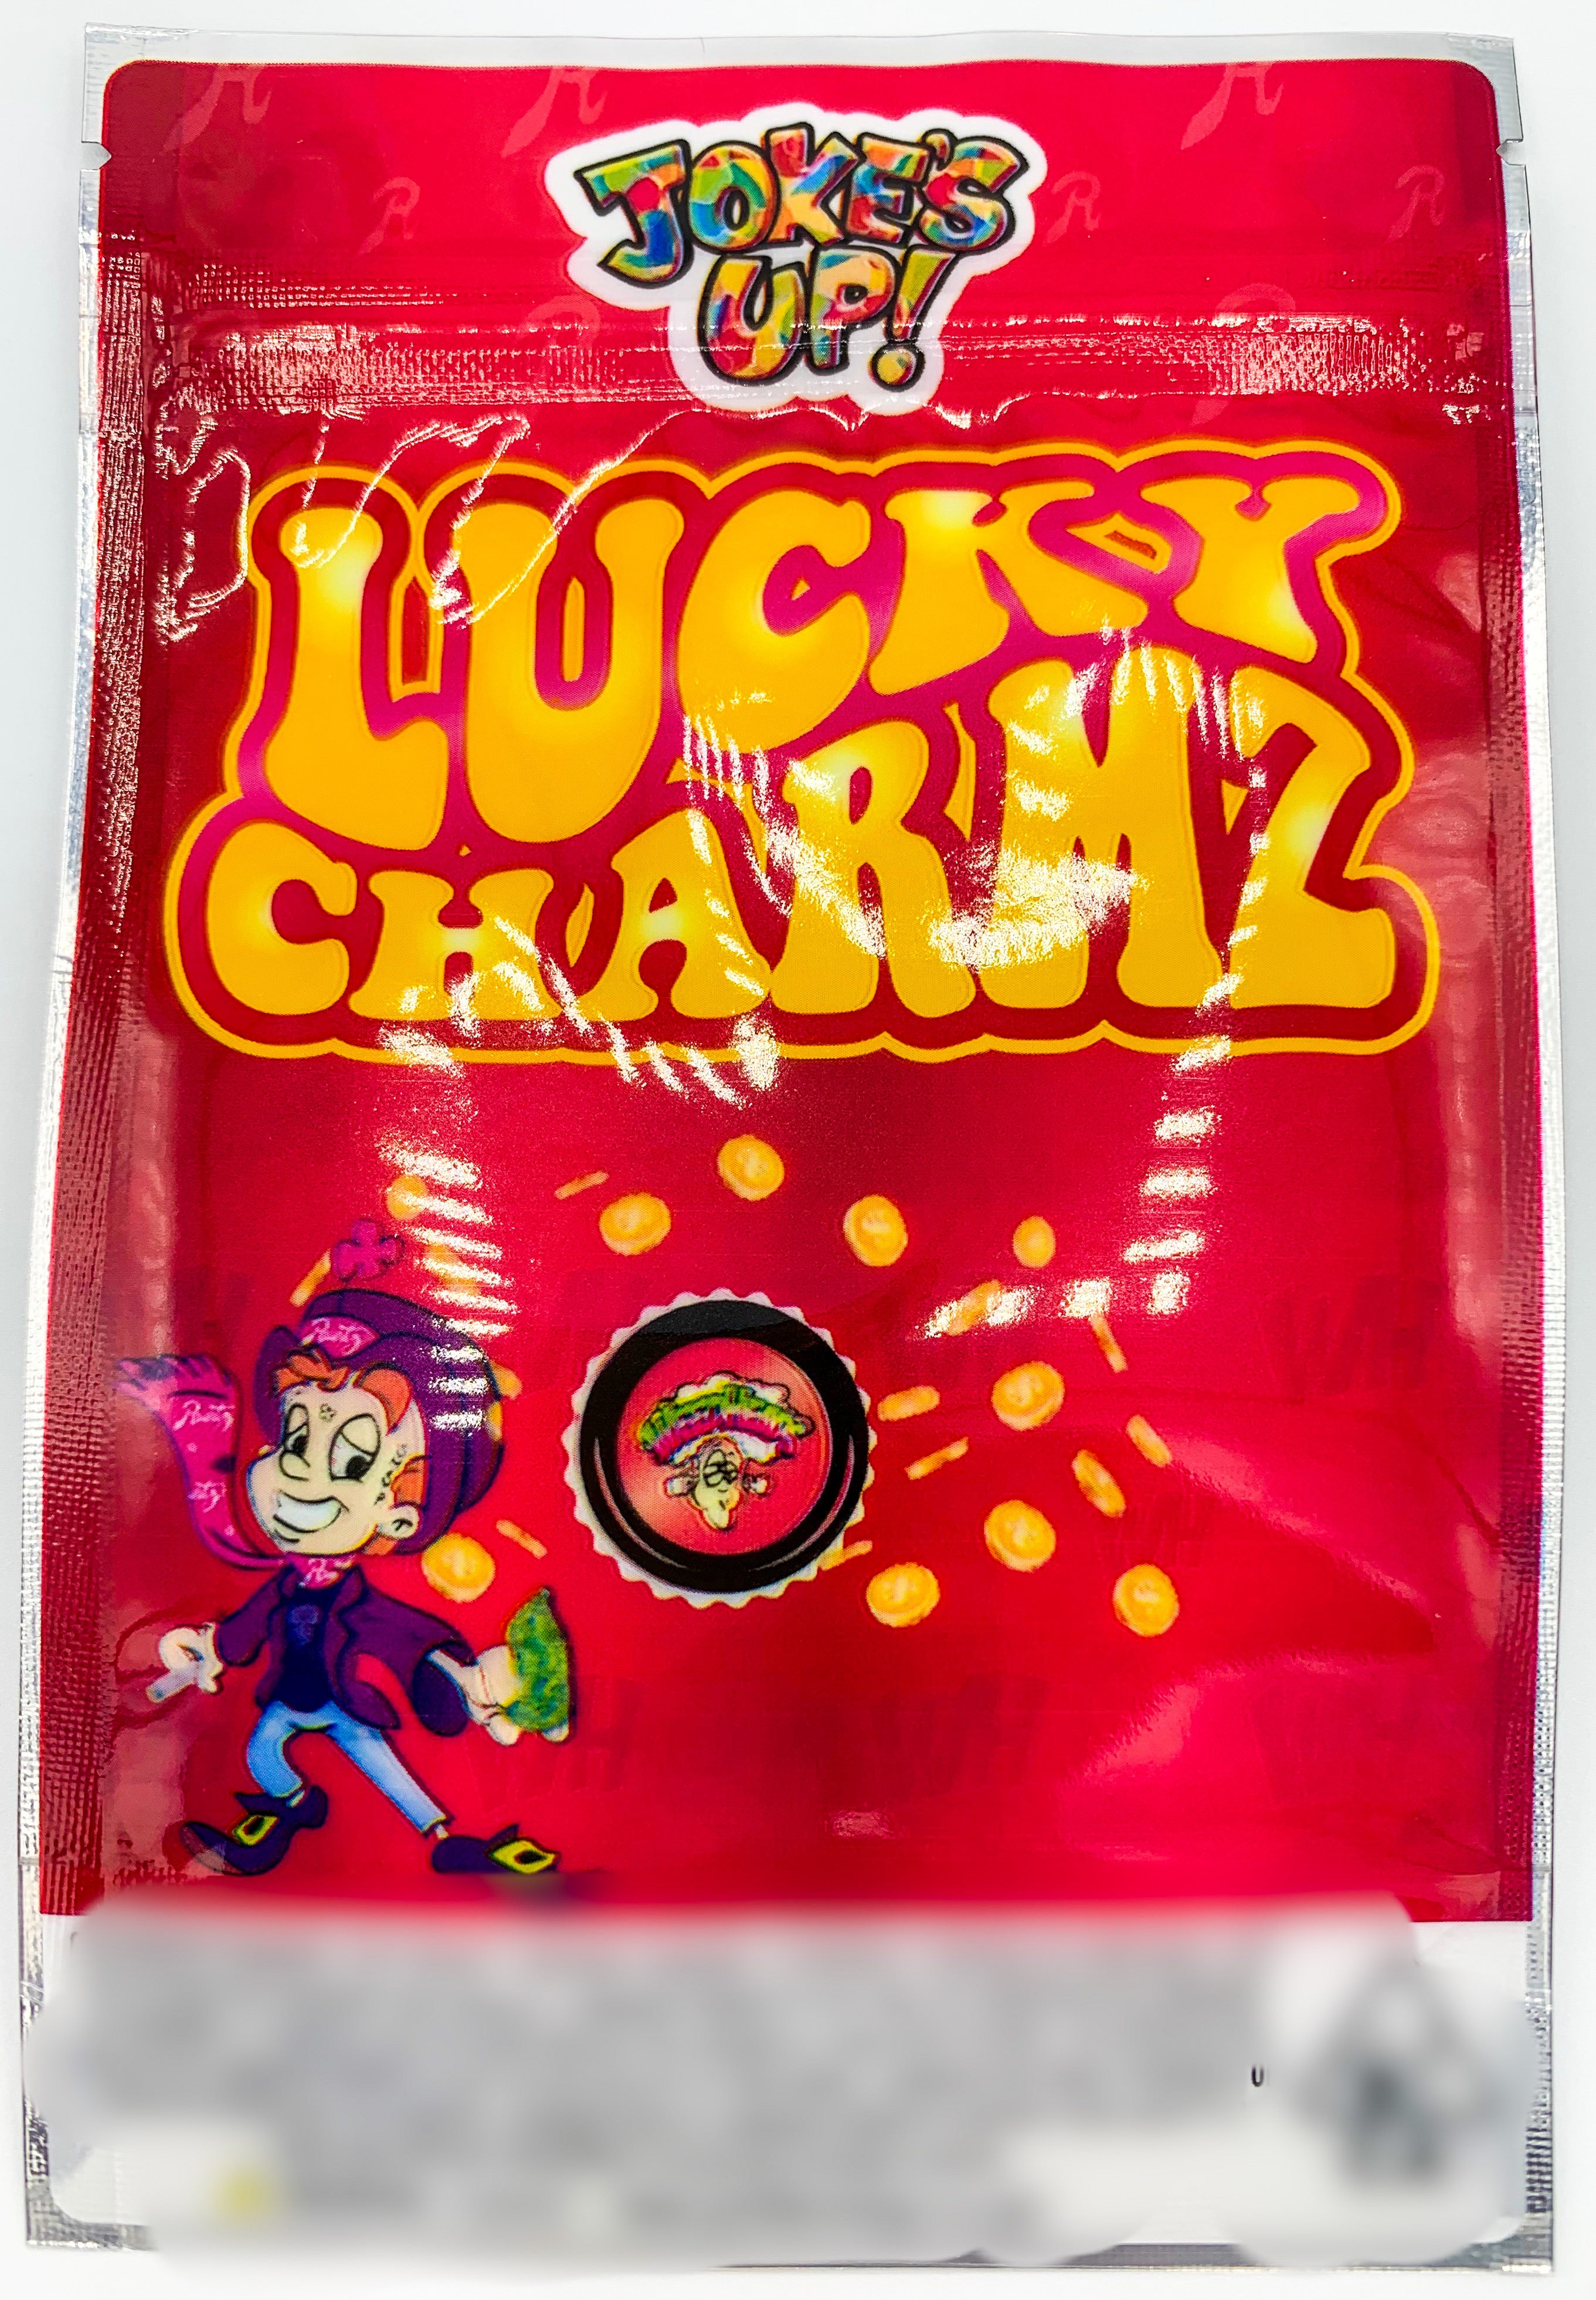 Jokes Up! Lucky Charms 3.5g